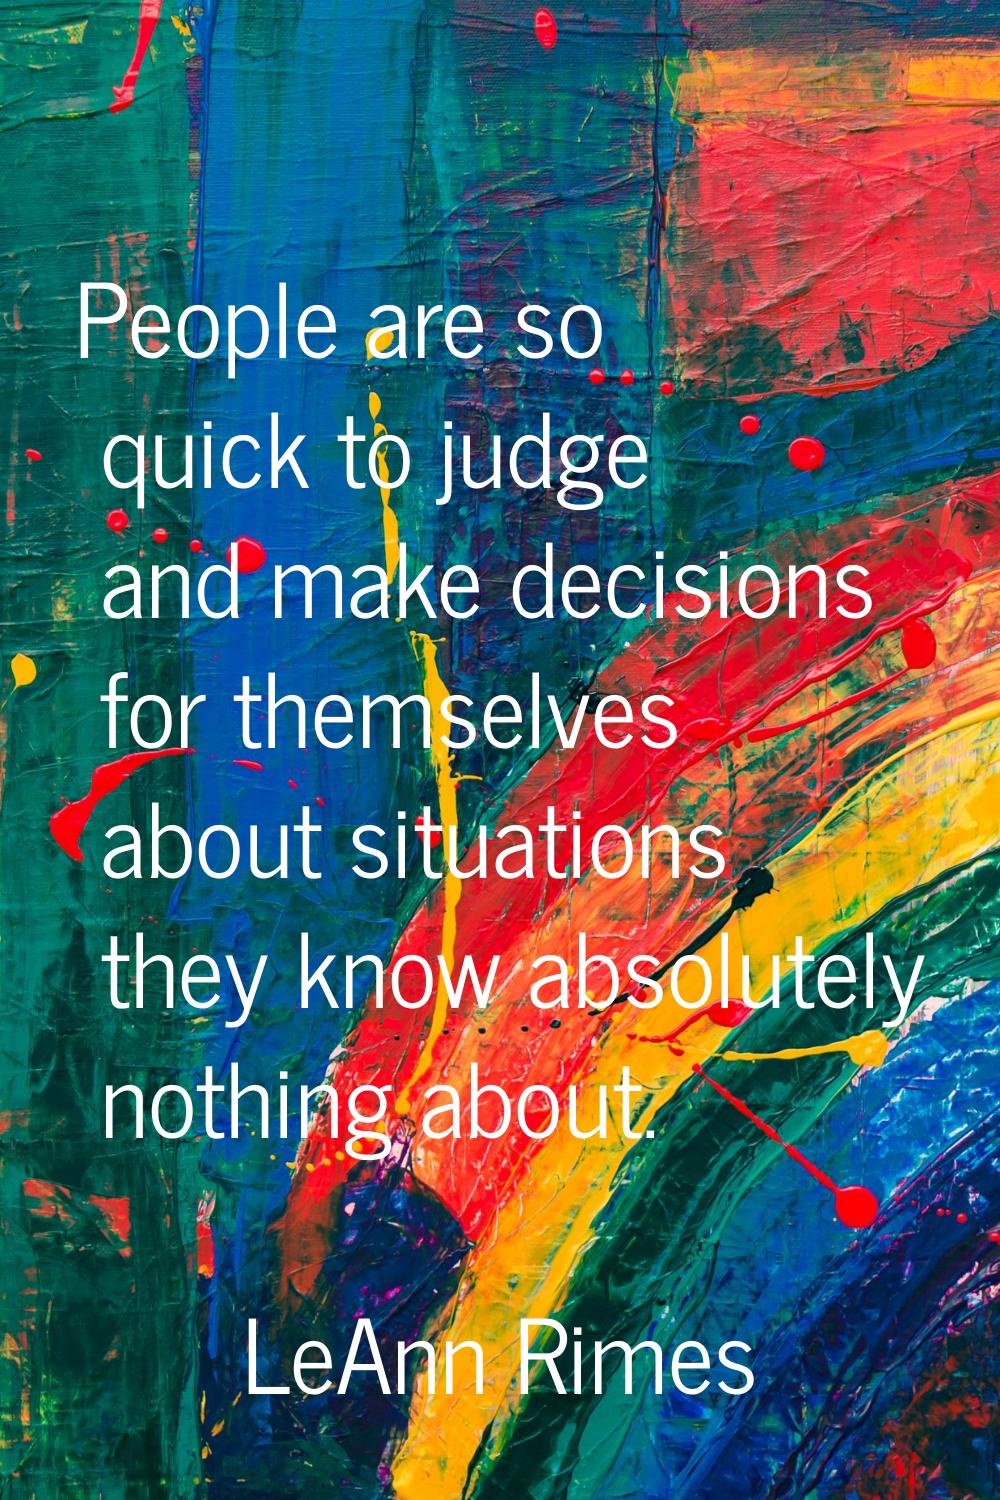 People are so quick to judge and make decisions for themselves about situations they know absolutel